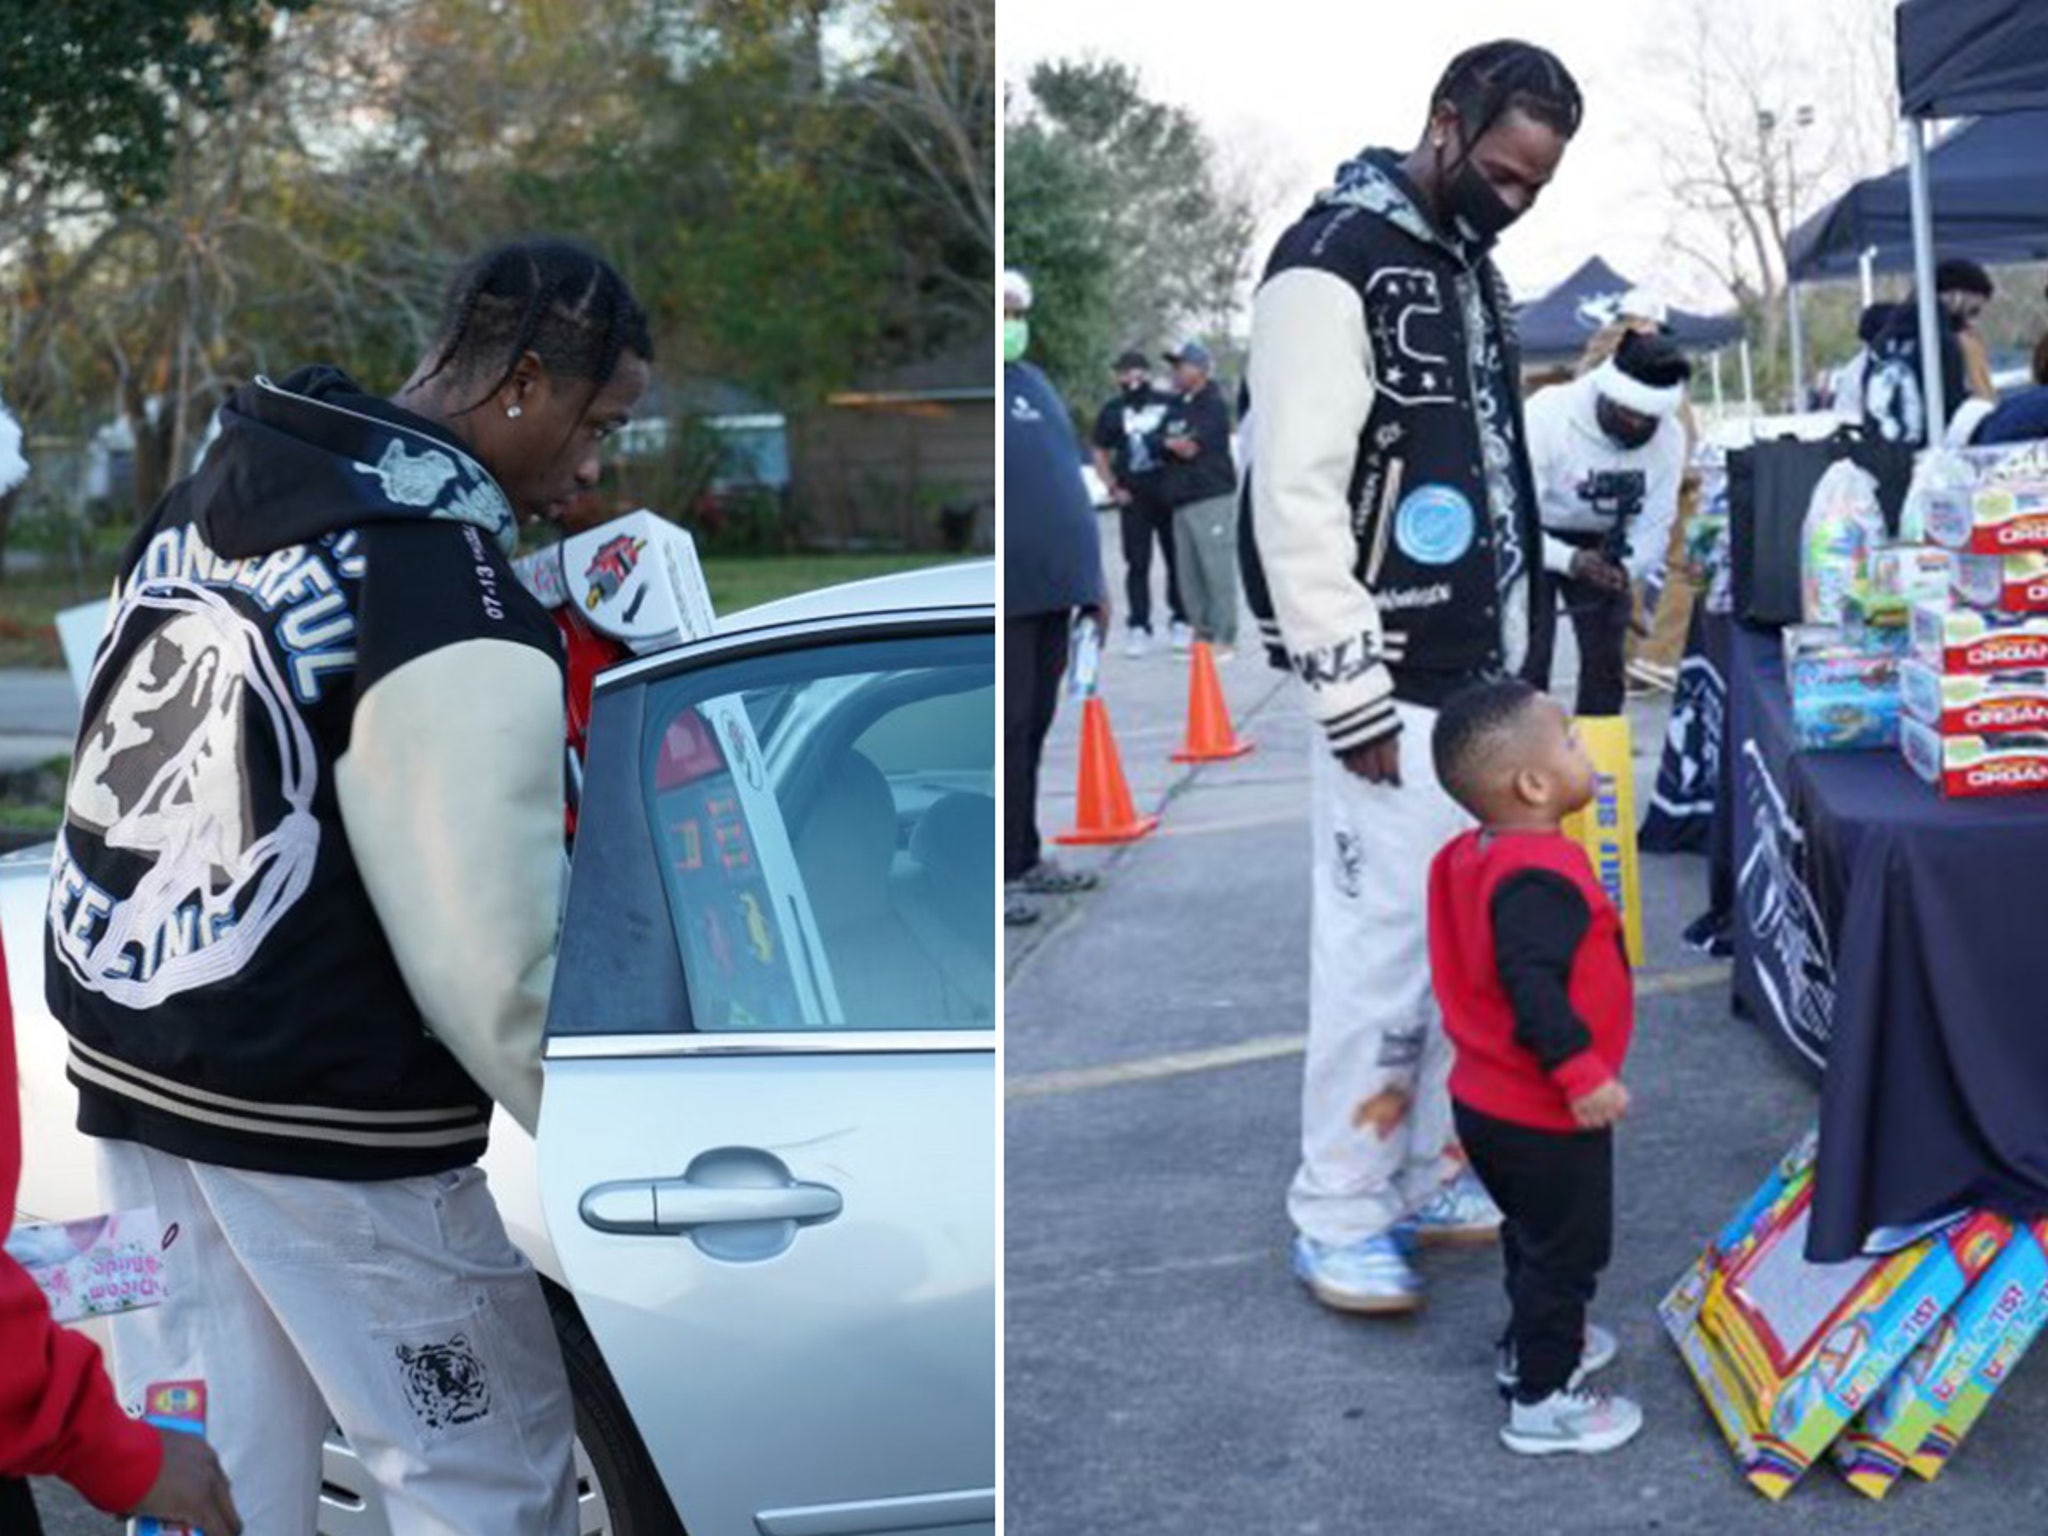 Travis Scott Gives Out Over 5,000 Toys to Houston Area Kids